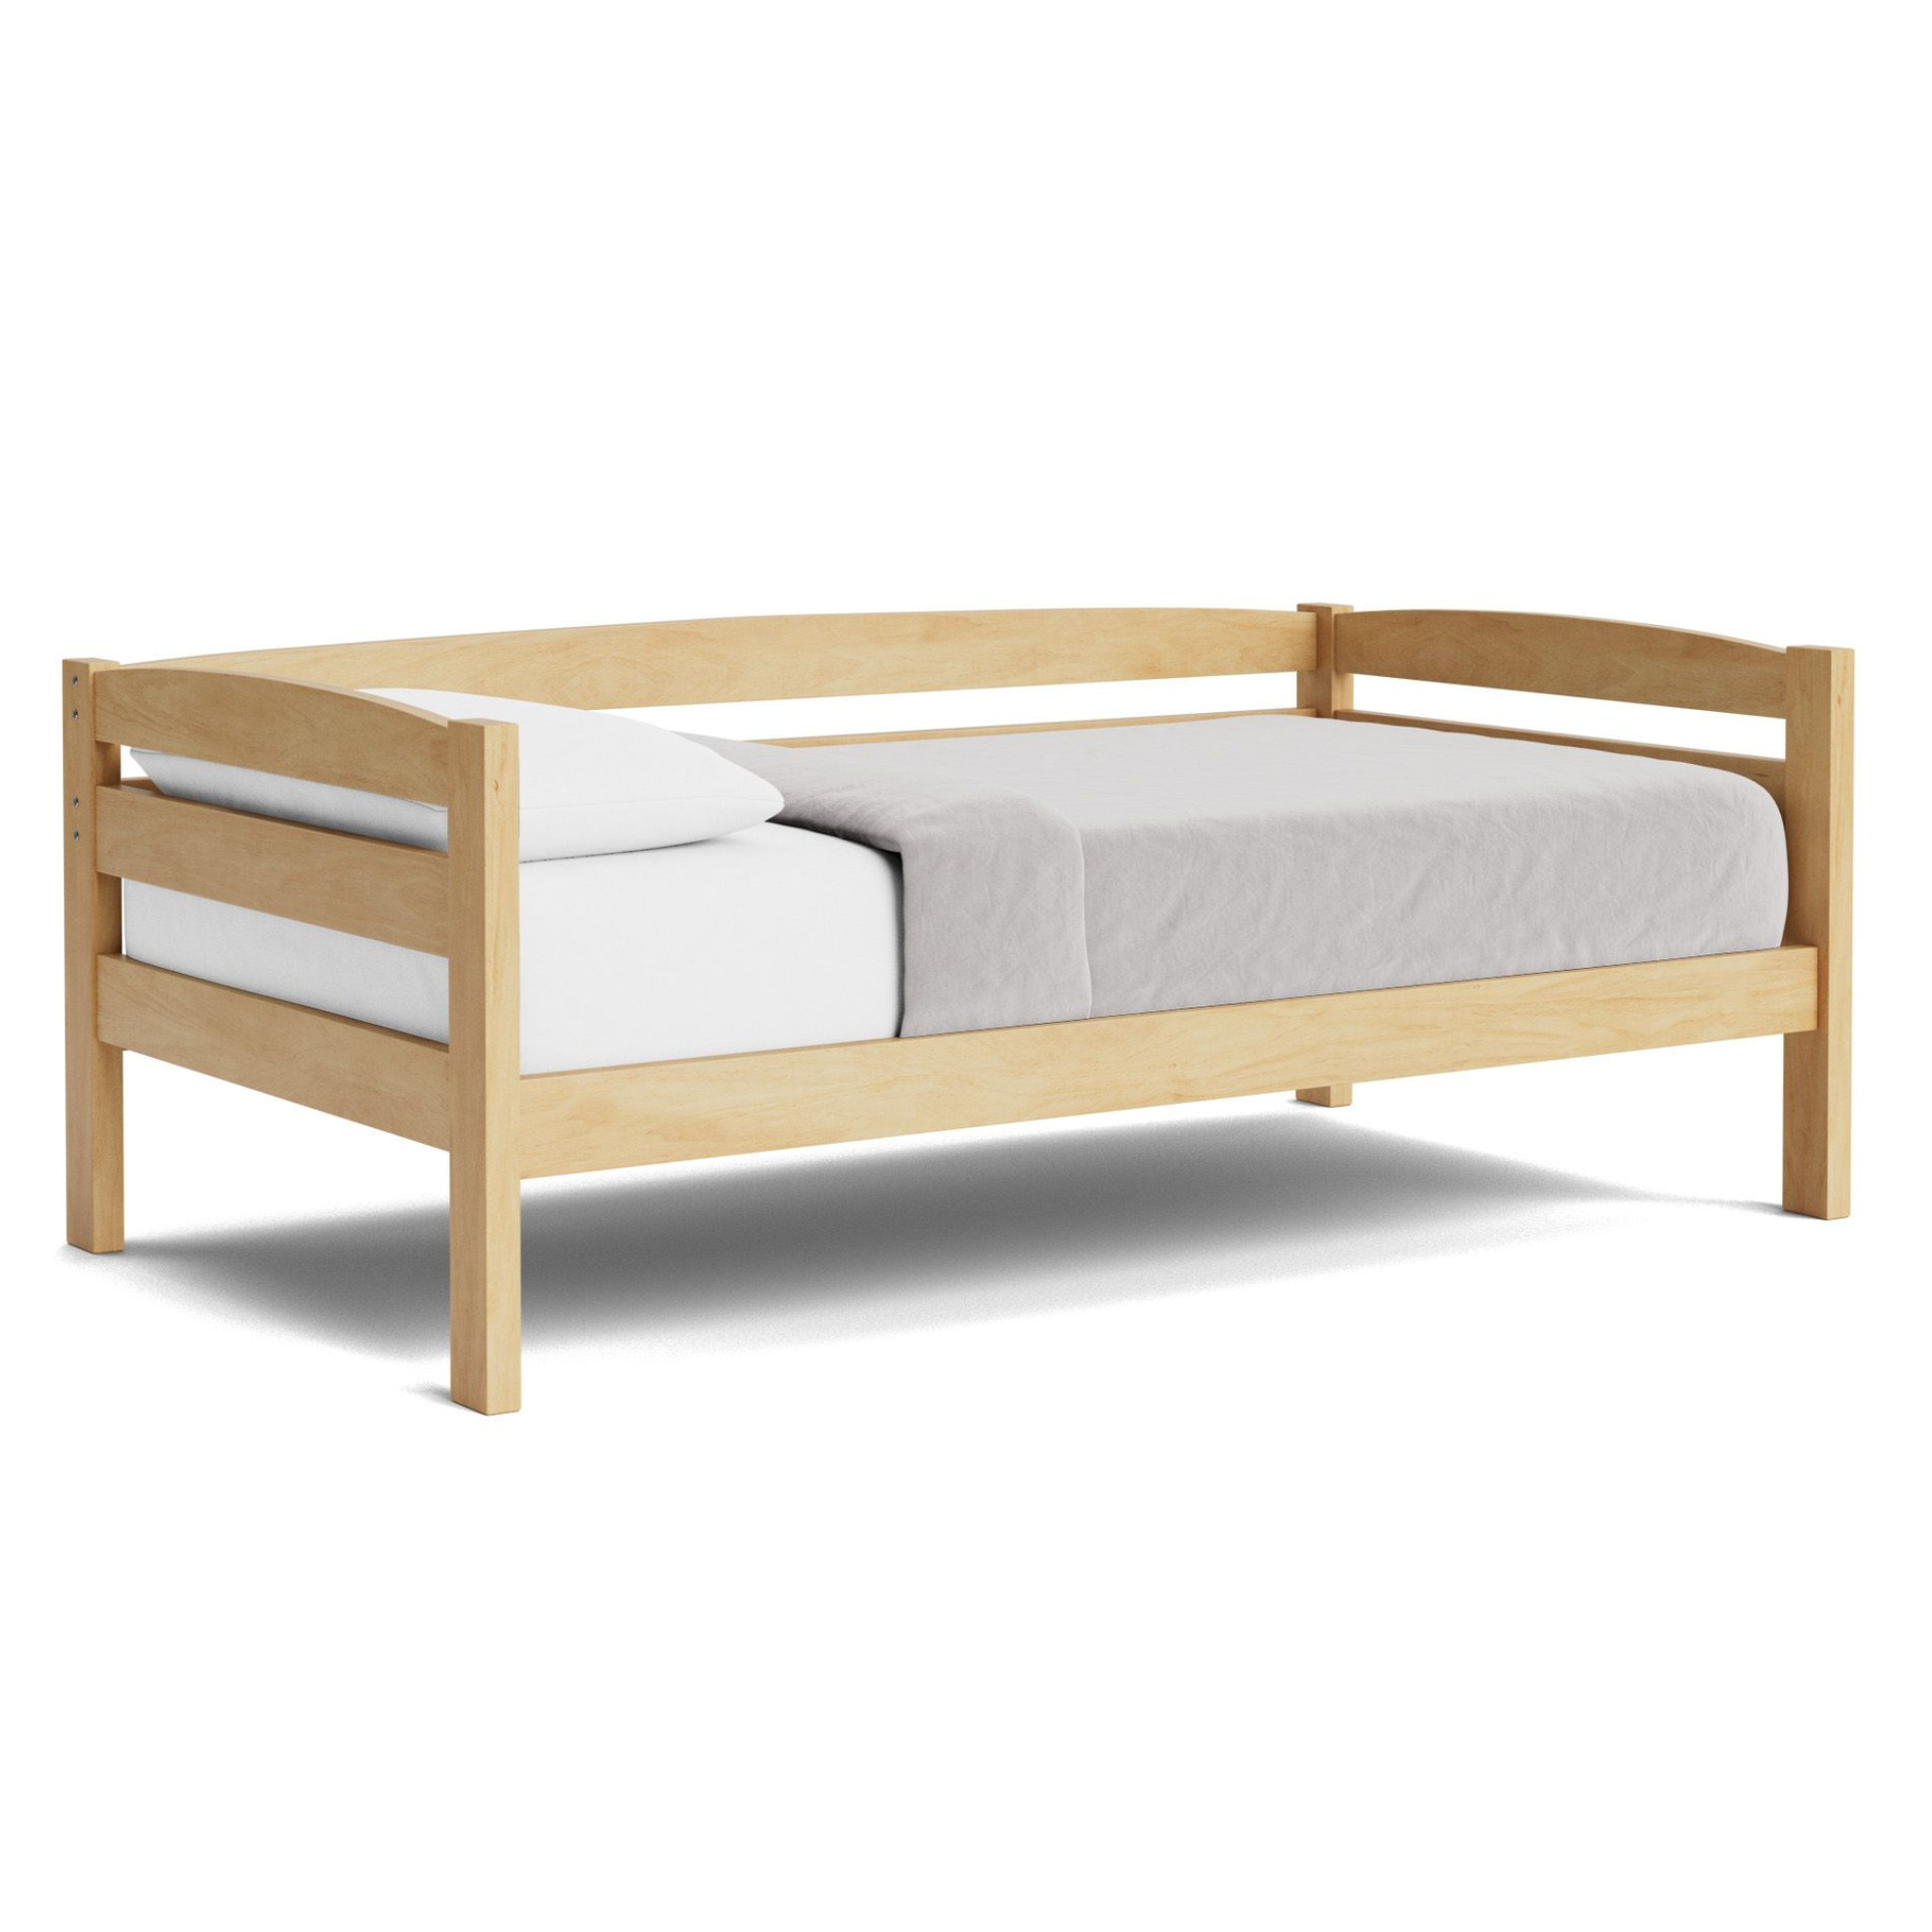 COASTER DAY BED | SINGLE OR KING SINGLE | NZ MADE